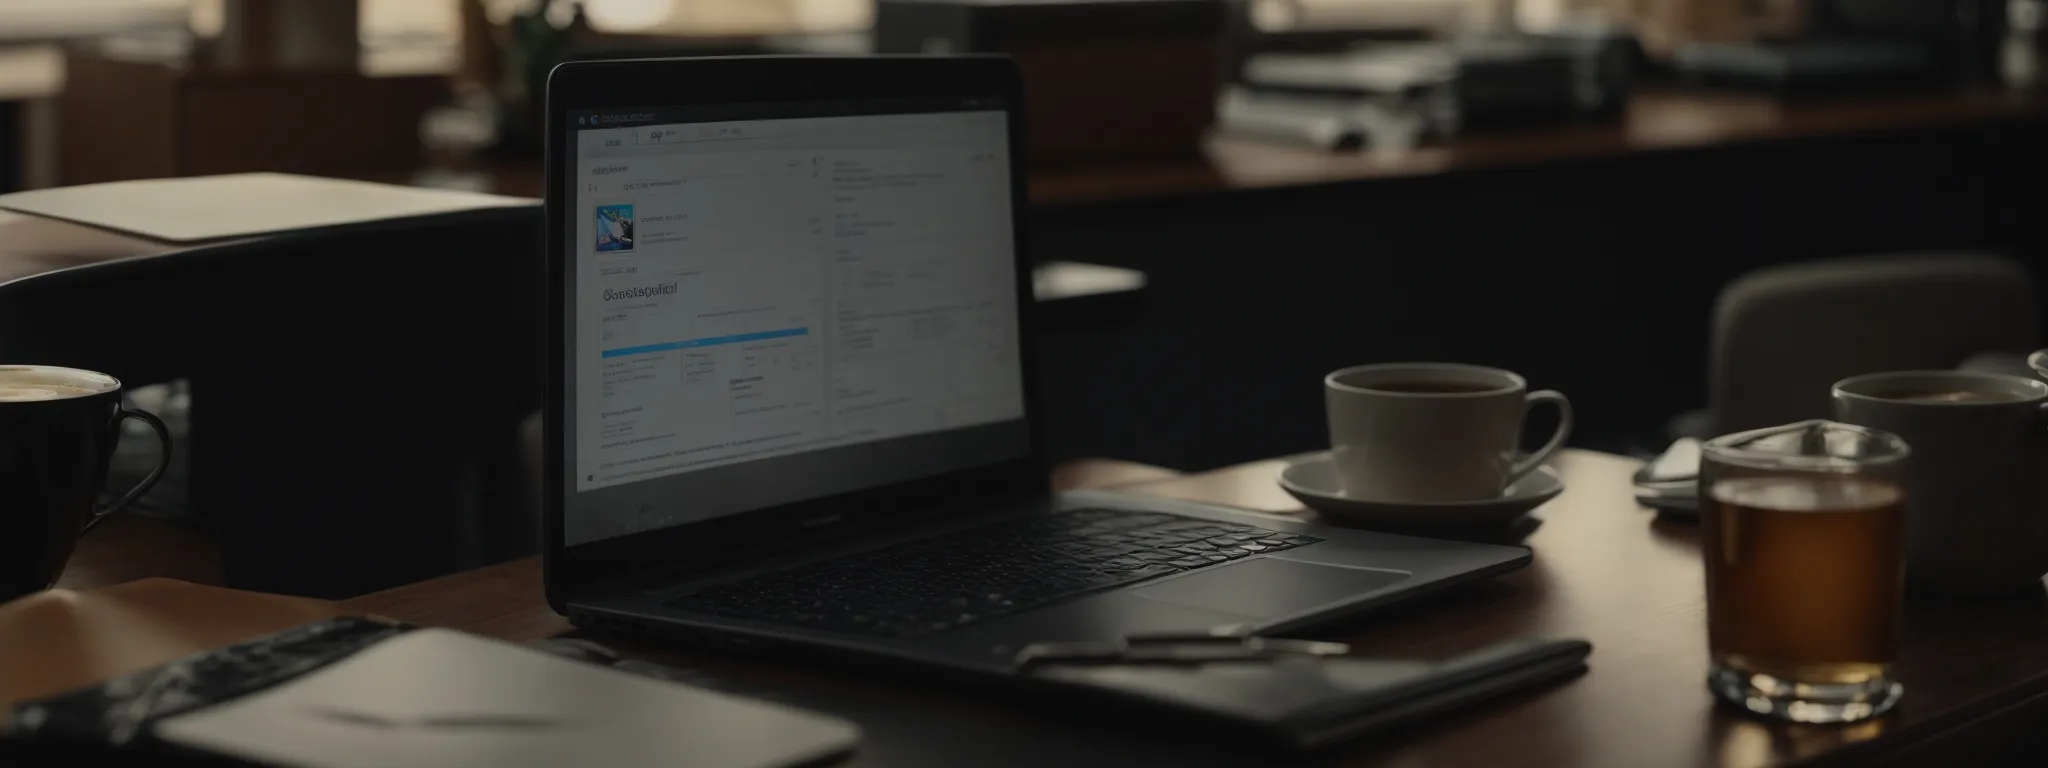 a close-up of an open laptop on a desk with seo analytics on the screen, alongside a notebook and a cup of coffee.